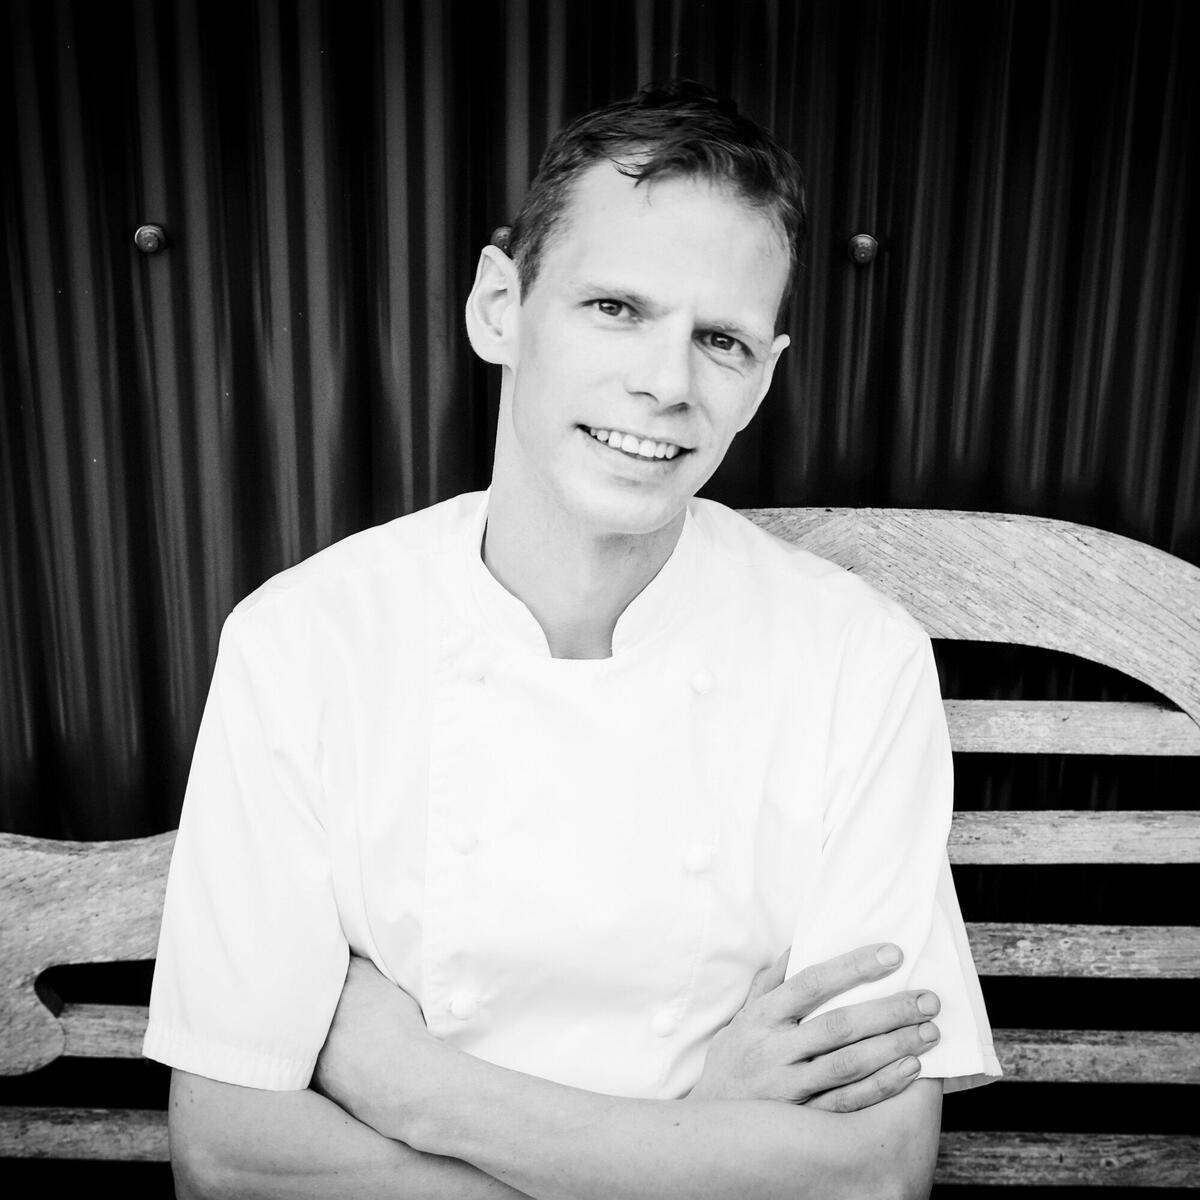 Head Chef, Chris Simpson by Jodi Hinds